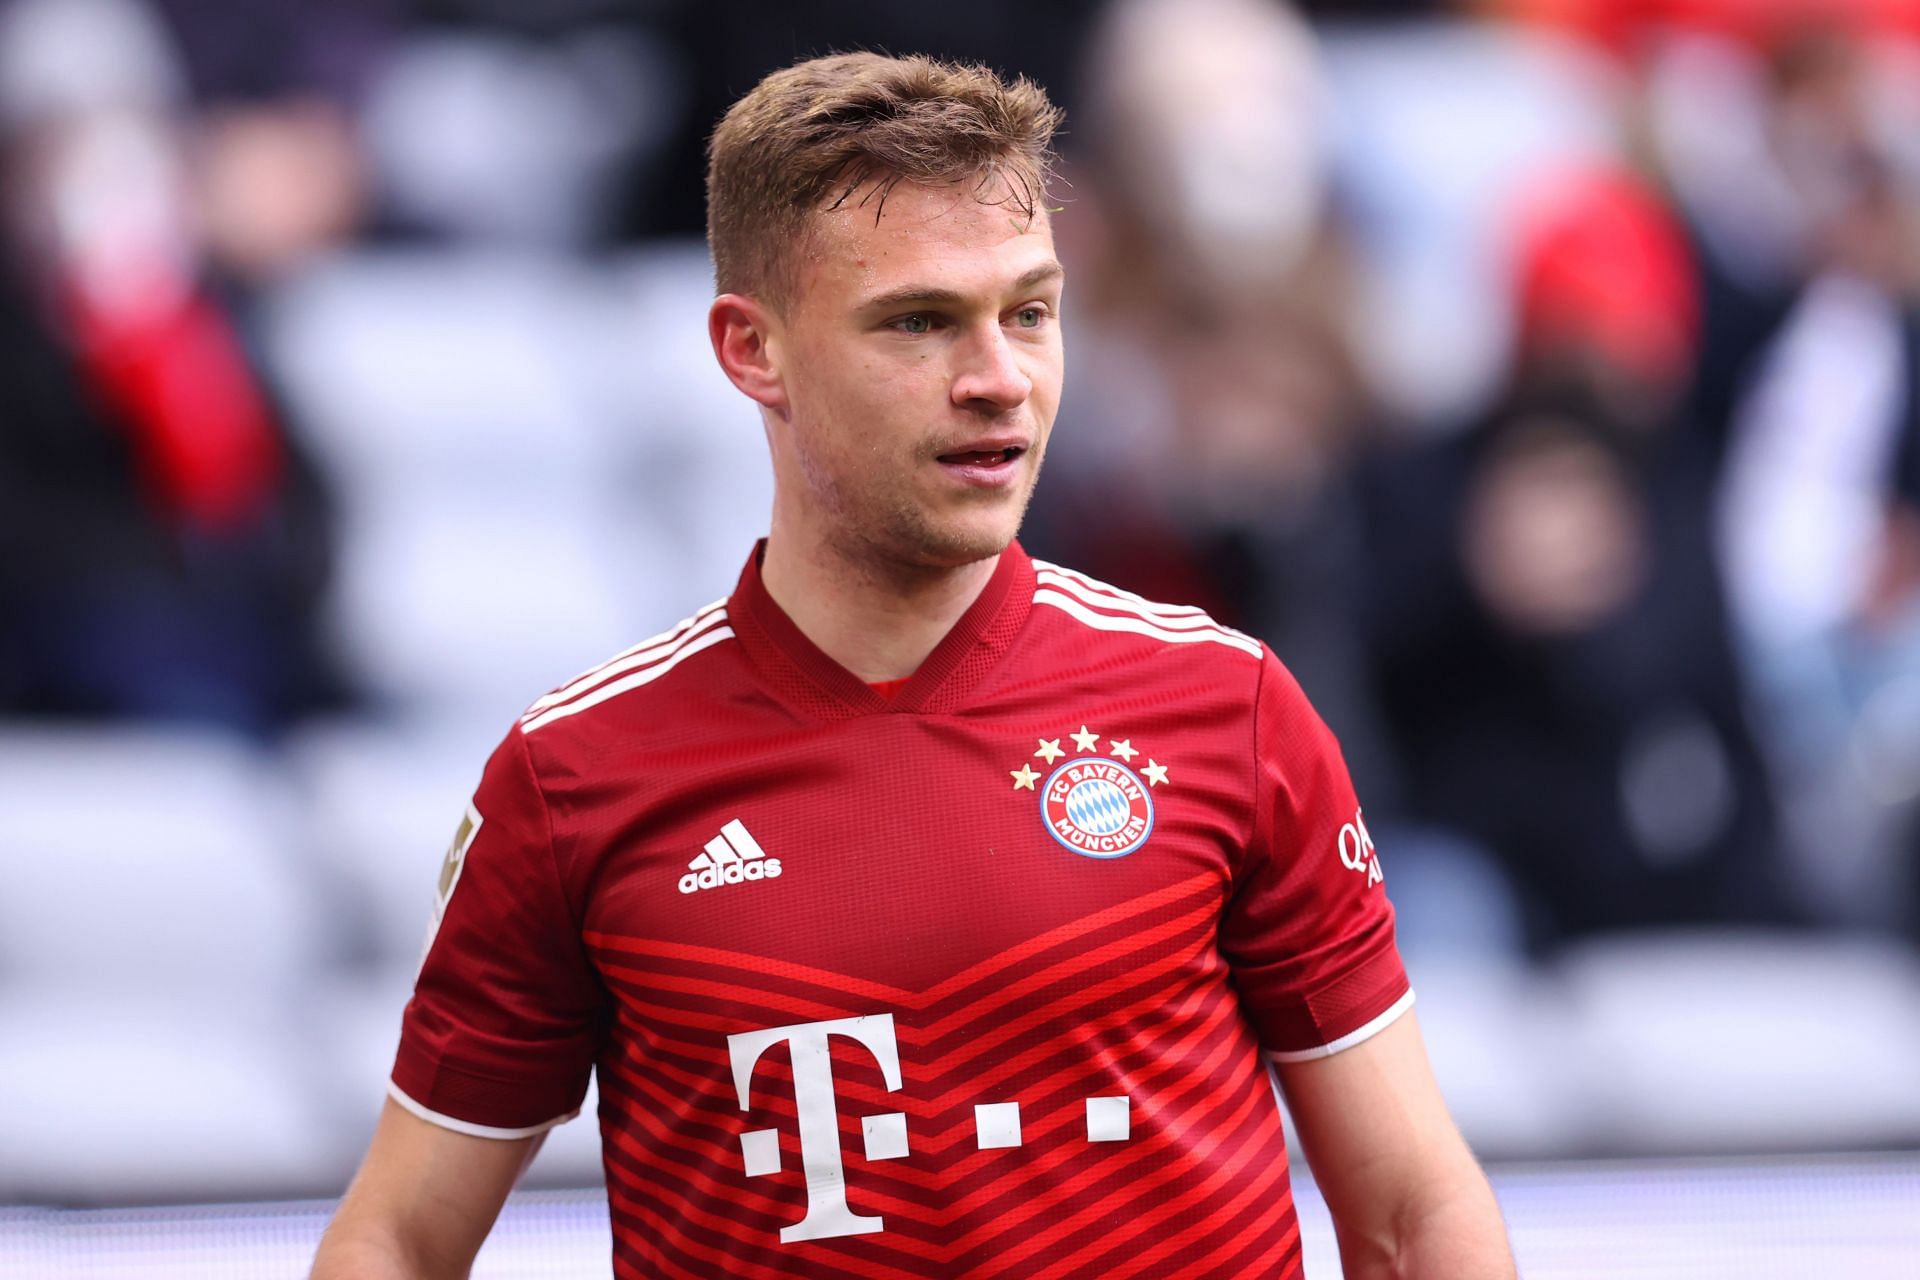 Kimmich is a truly world class German player